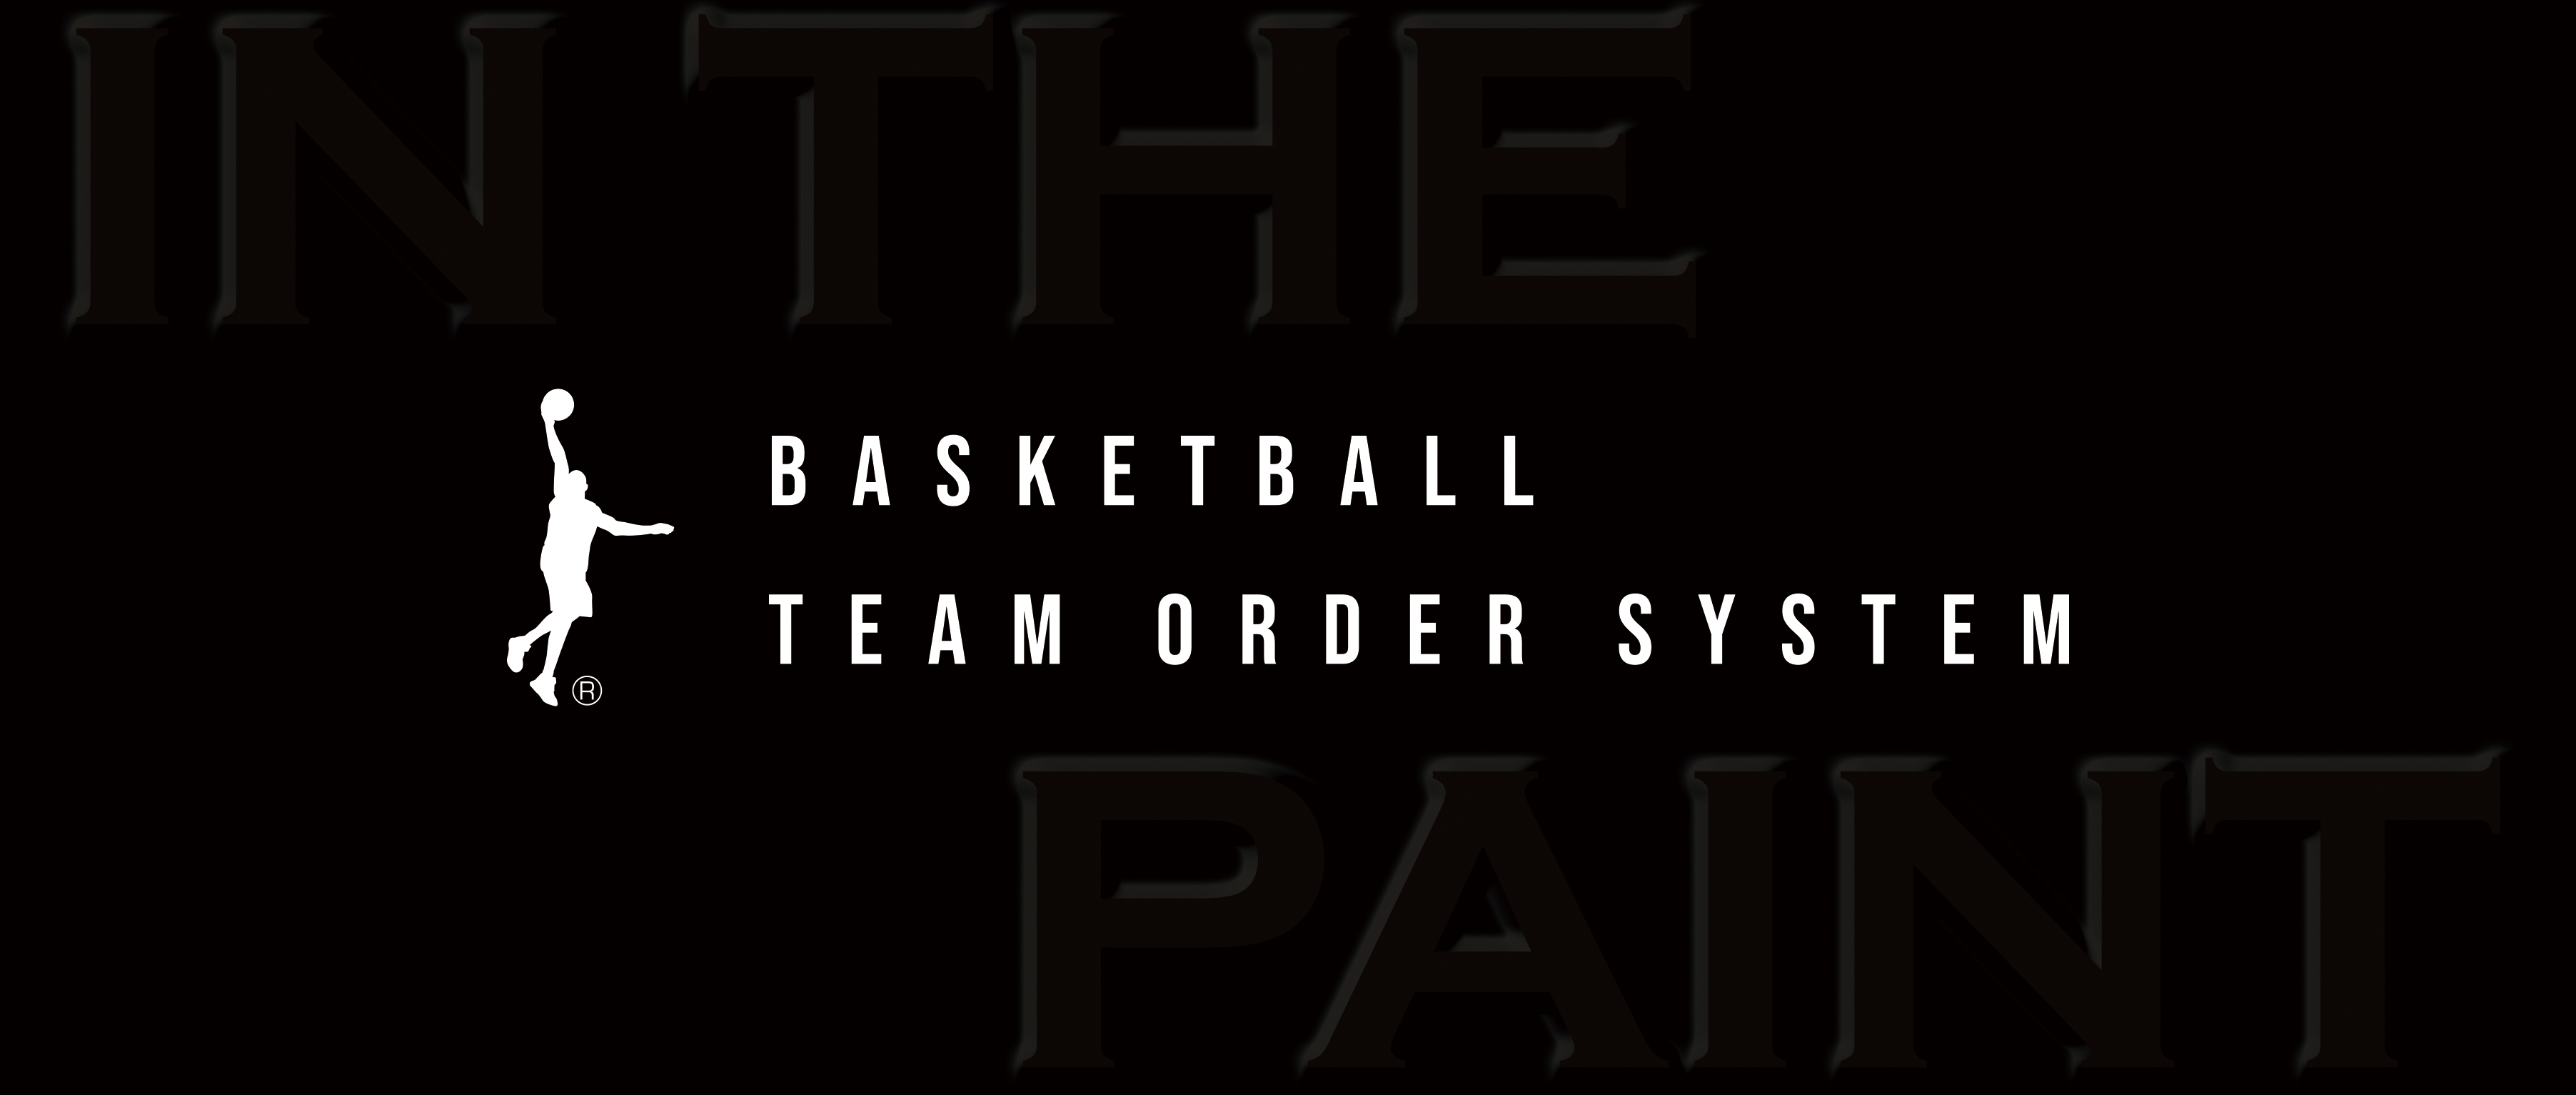 IN THE PAINT OFFICIAL SITE